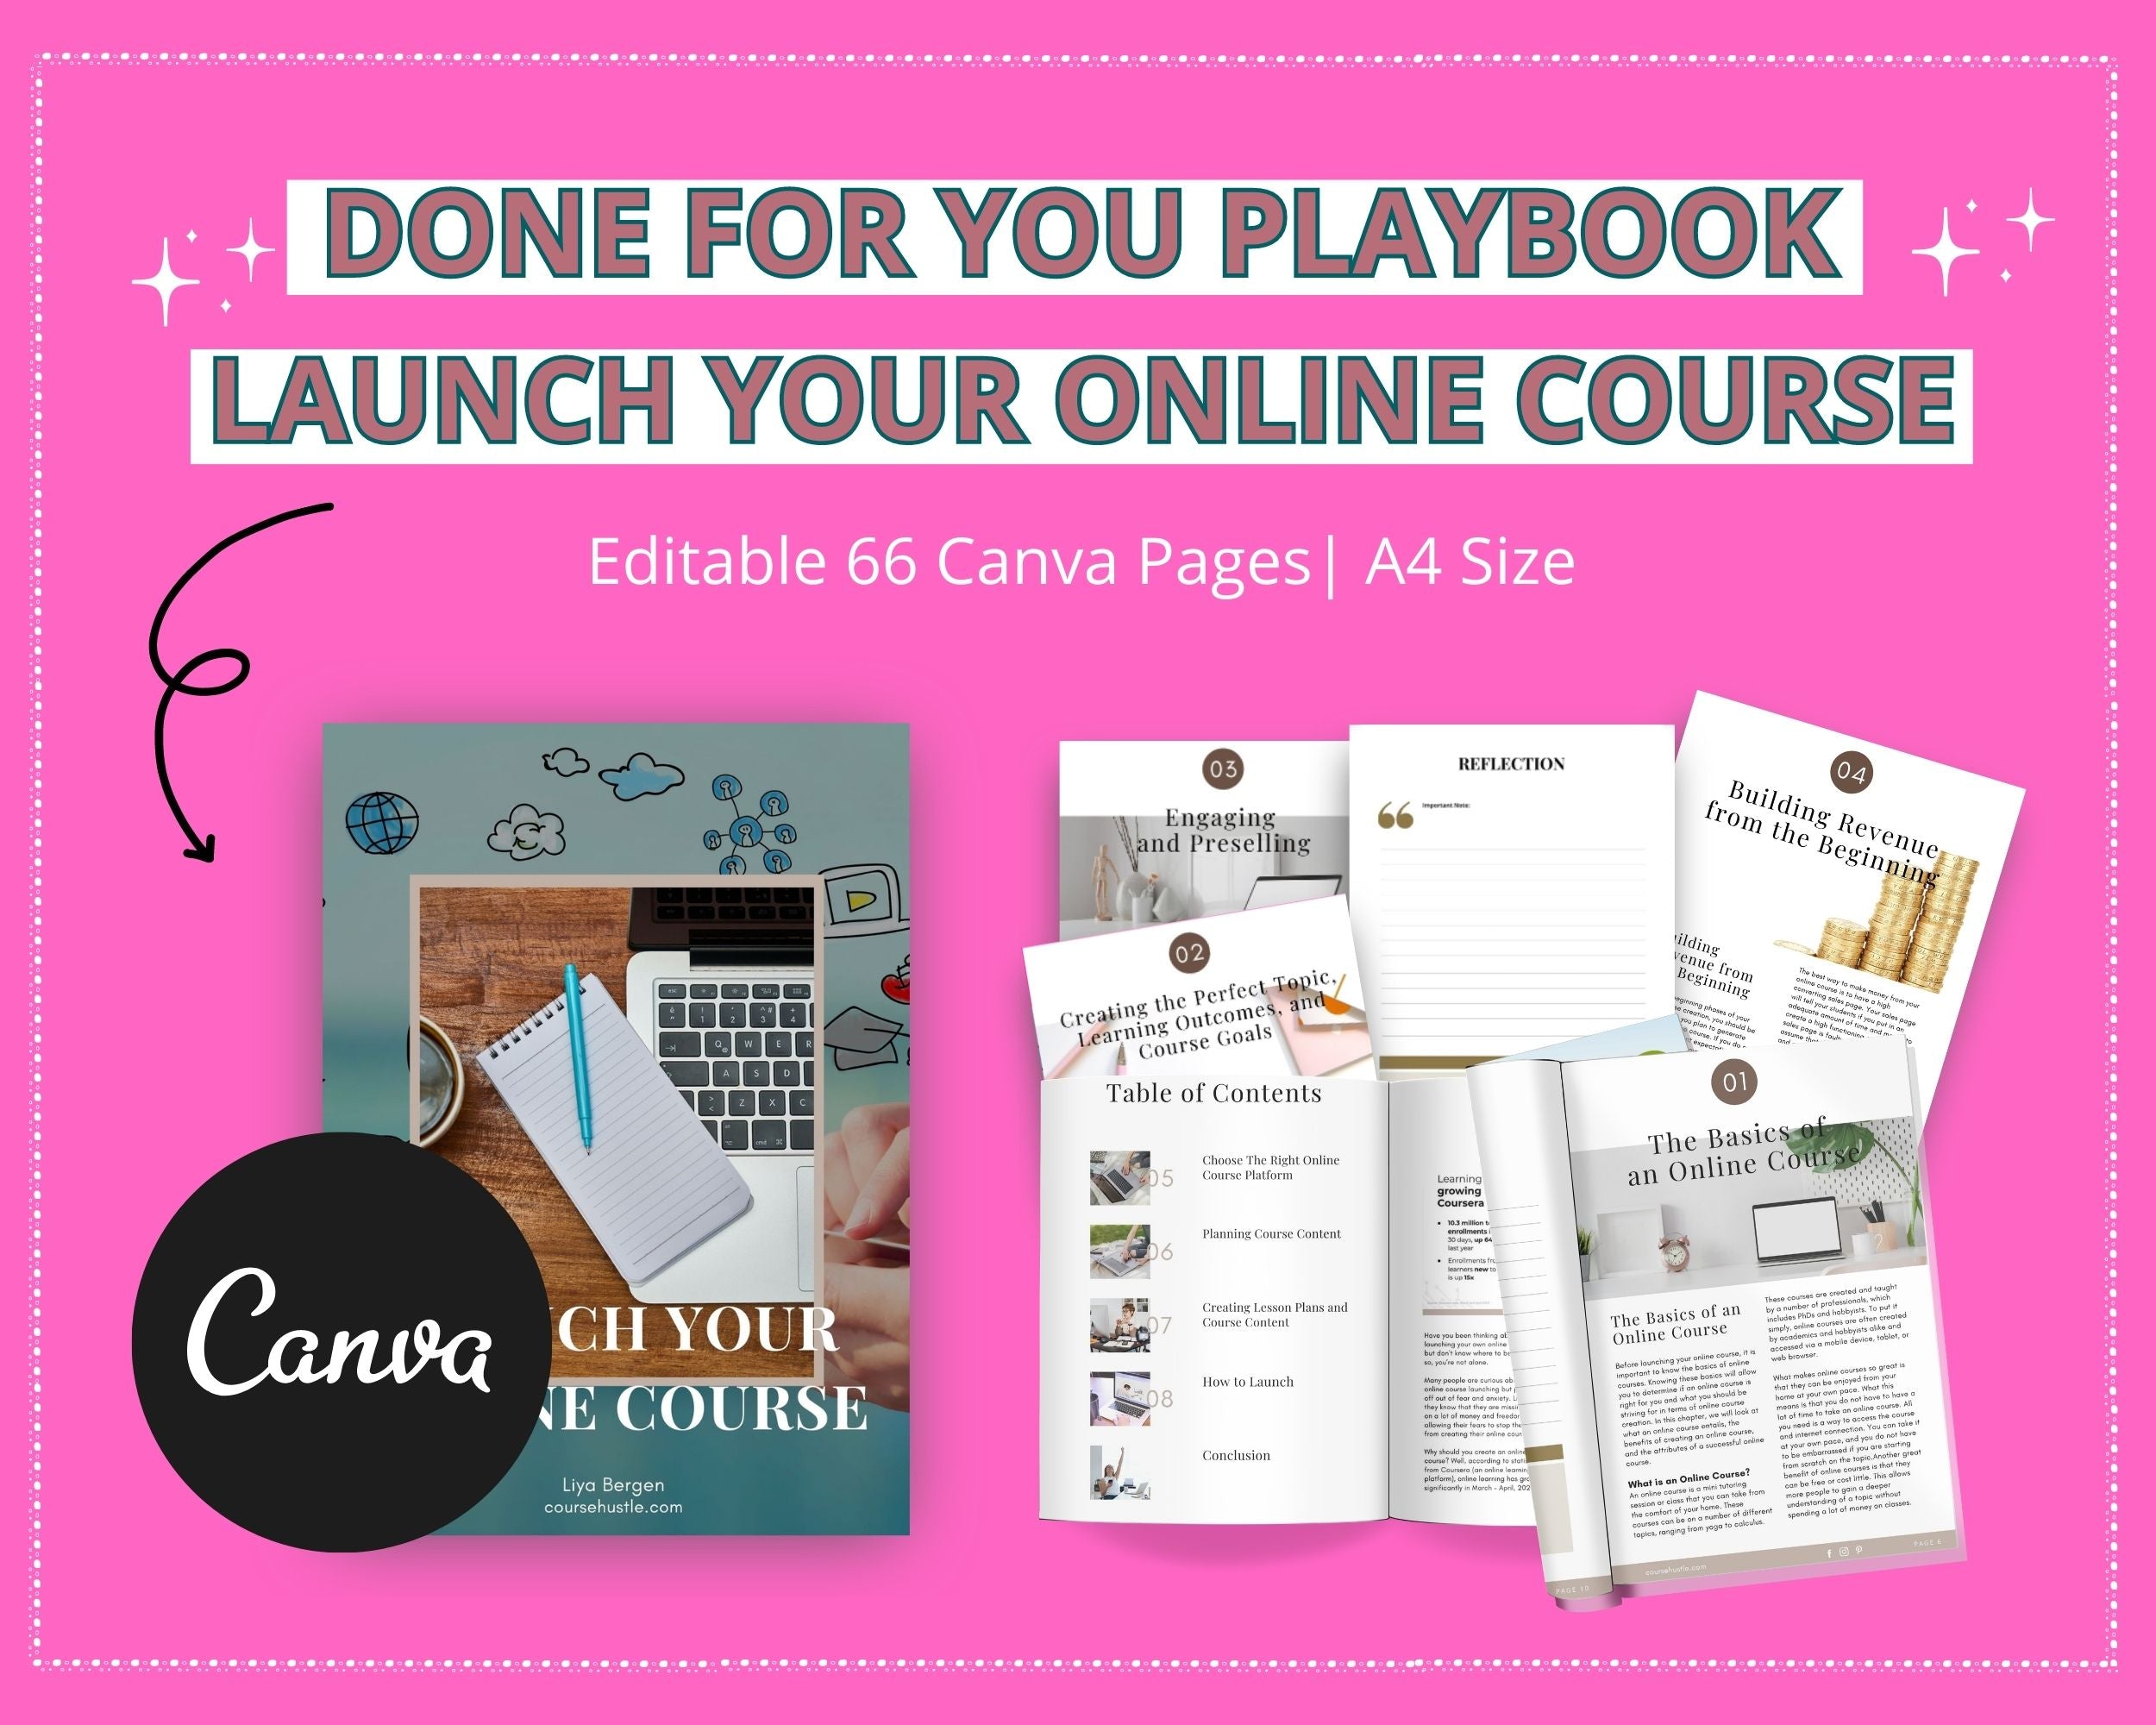 Done-for-You Launch Your Online Course Playbook in Canva